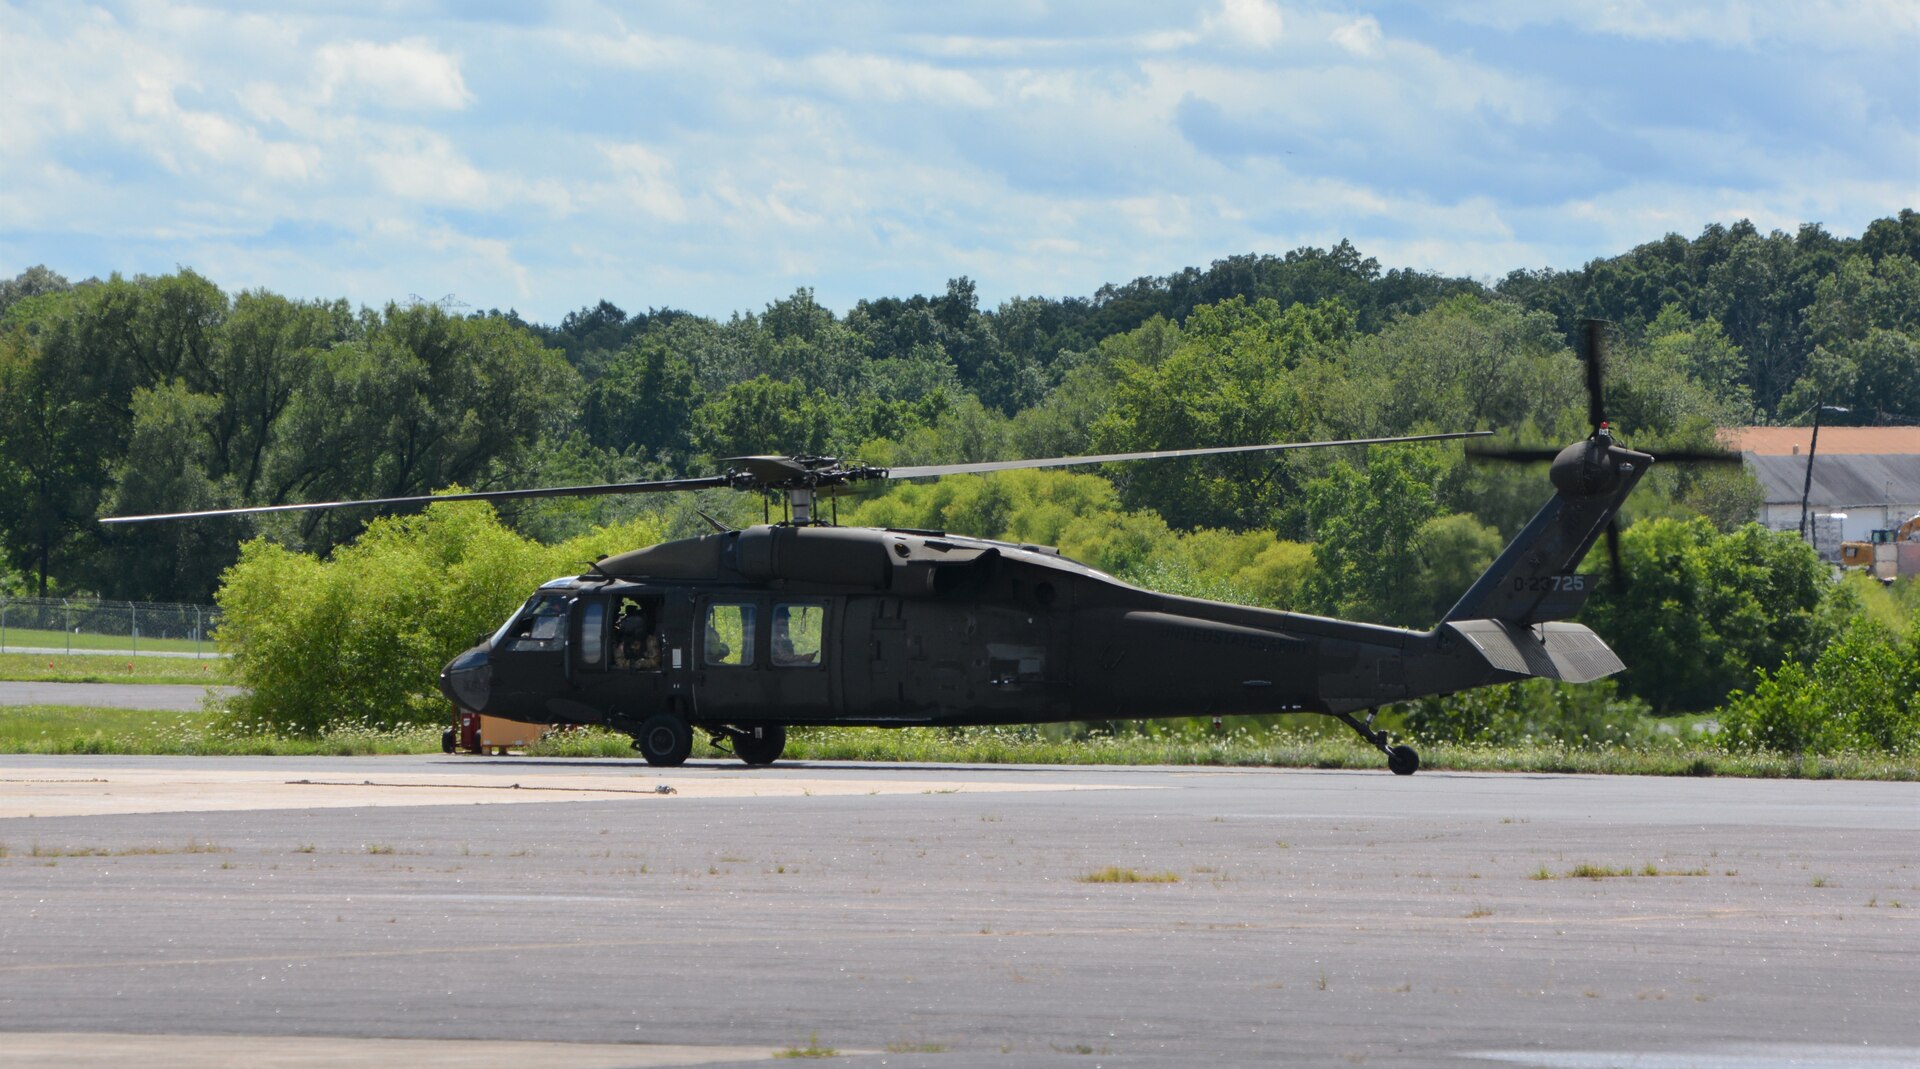 Pennsylvania National Guard Staff Sgt. Noah McElory looks out the window of the UH-60 Black Hawk containing the Pennsylvania Helicopter Aquatic Rescue Team as it takes off from Muir Army Airfield, Fort Indiantown Gap, Pa., Aug. 4, 2020. The team saved two motorists from rising flood waters during Tropical Storm Isaias.